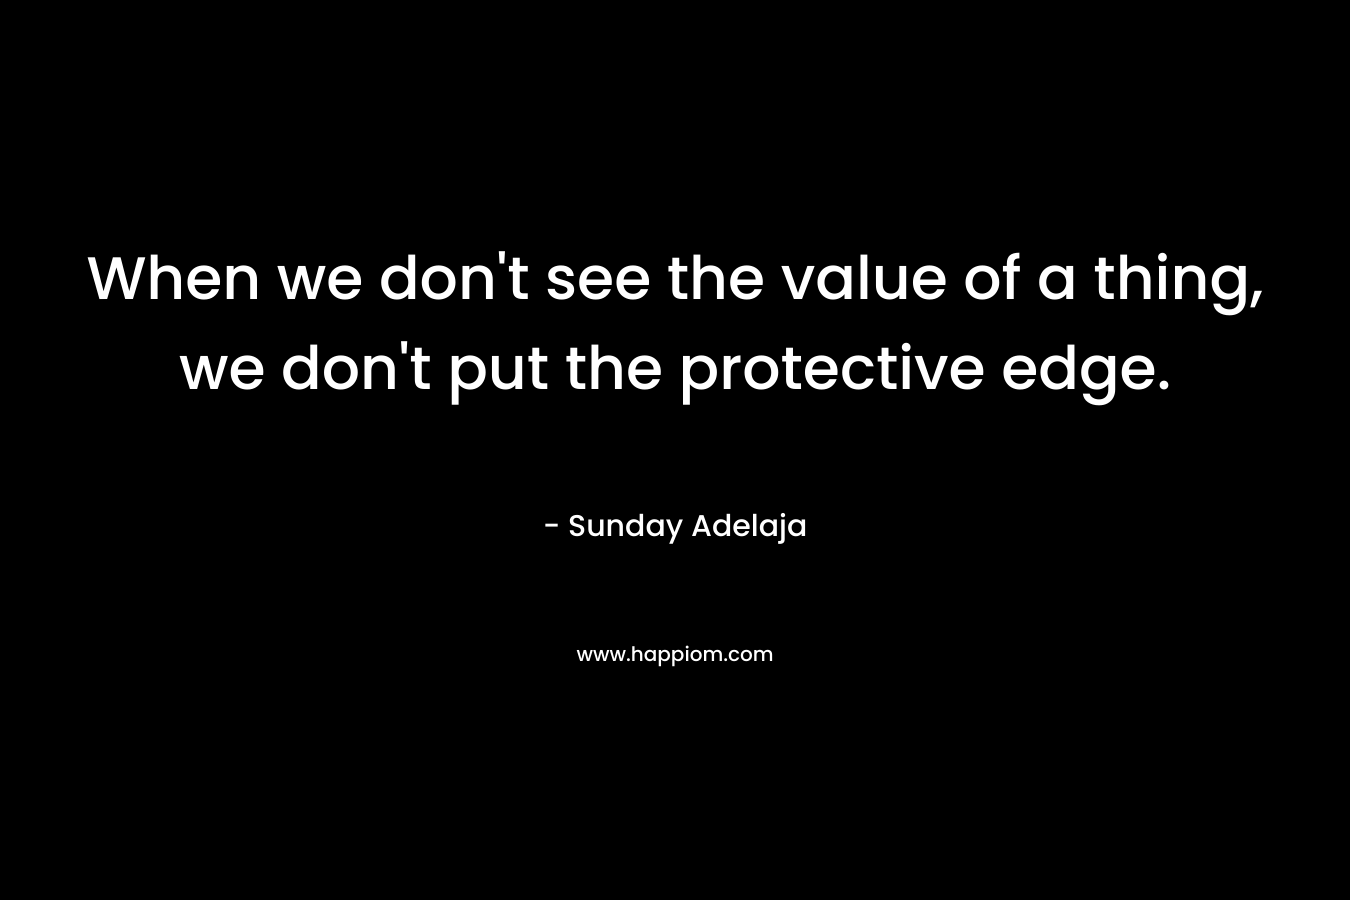 When we don't see the value of a thing, we don't put the protective edge.